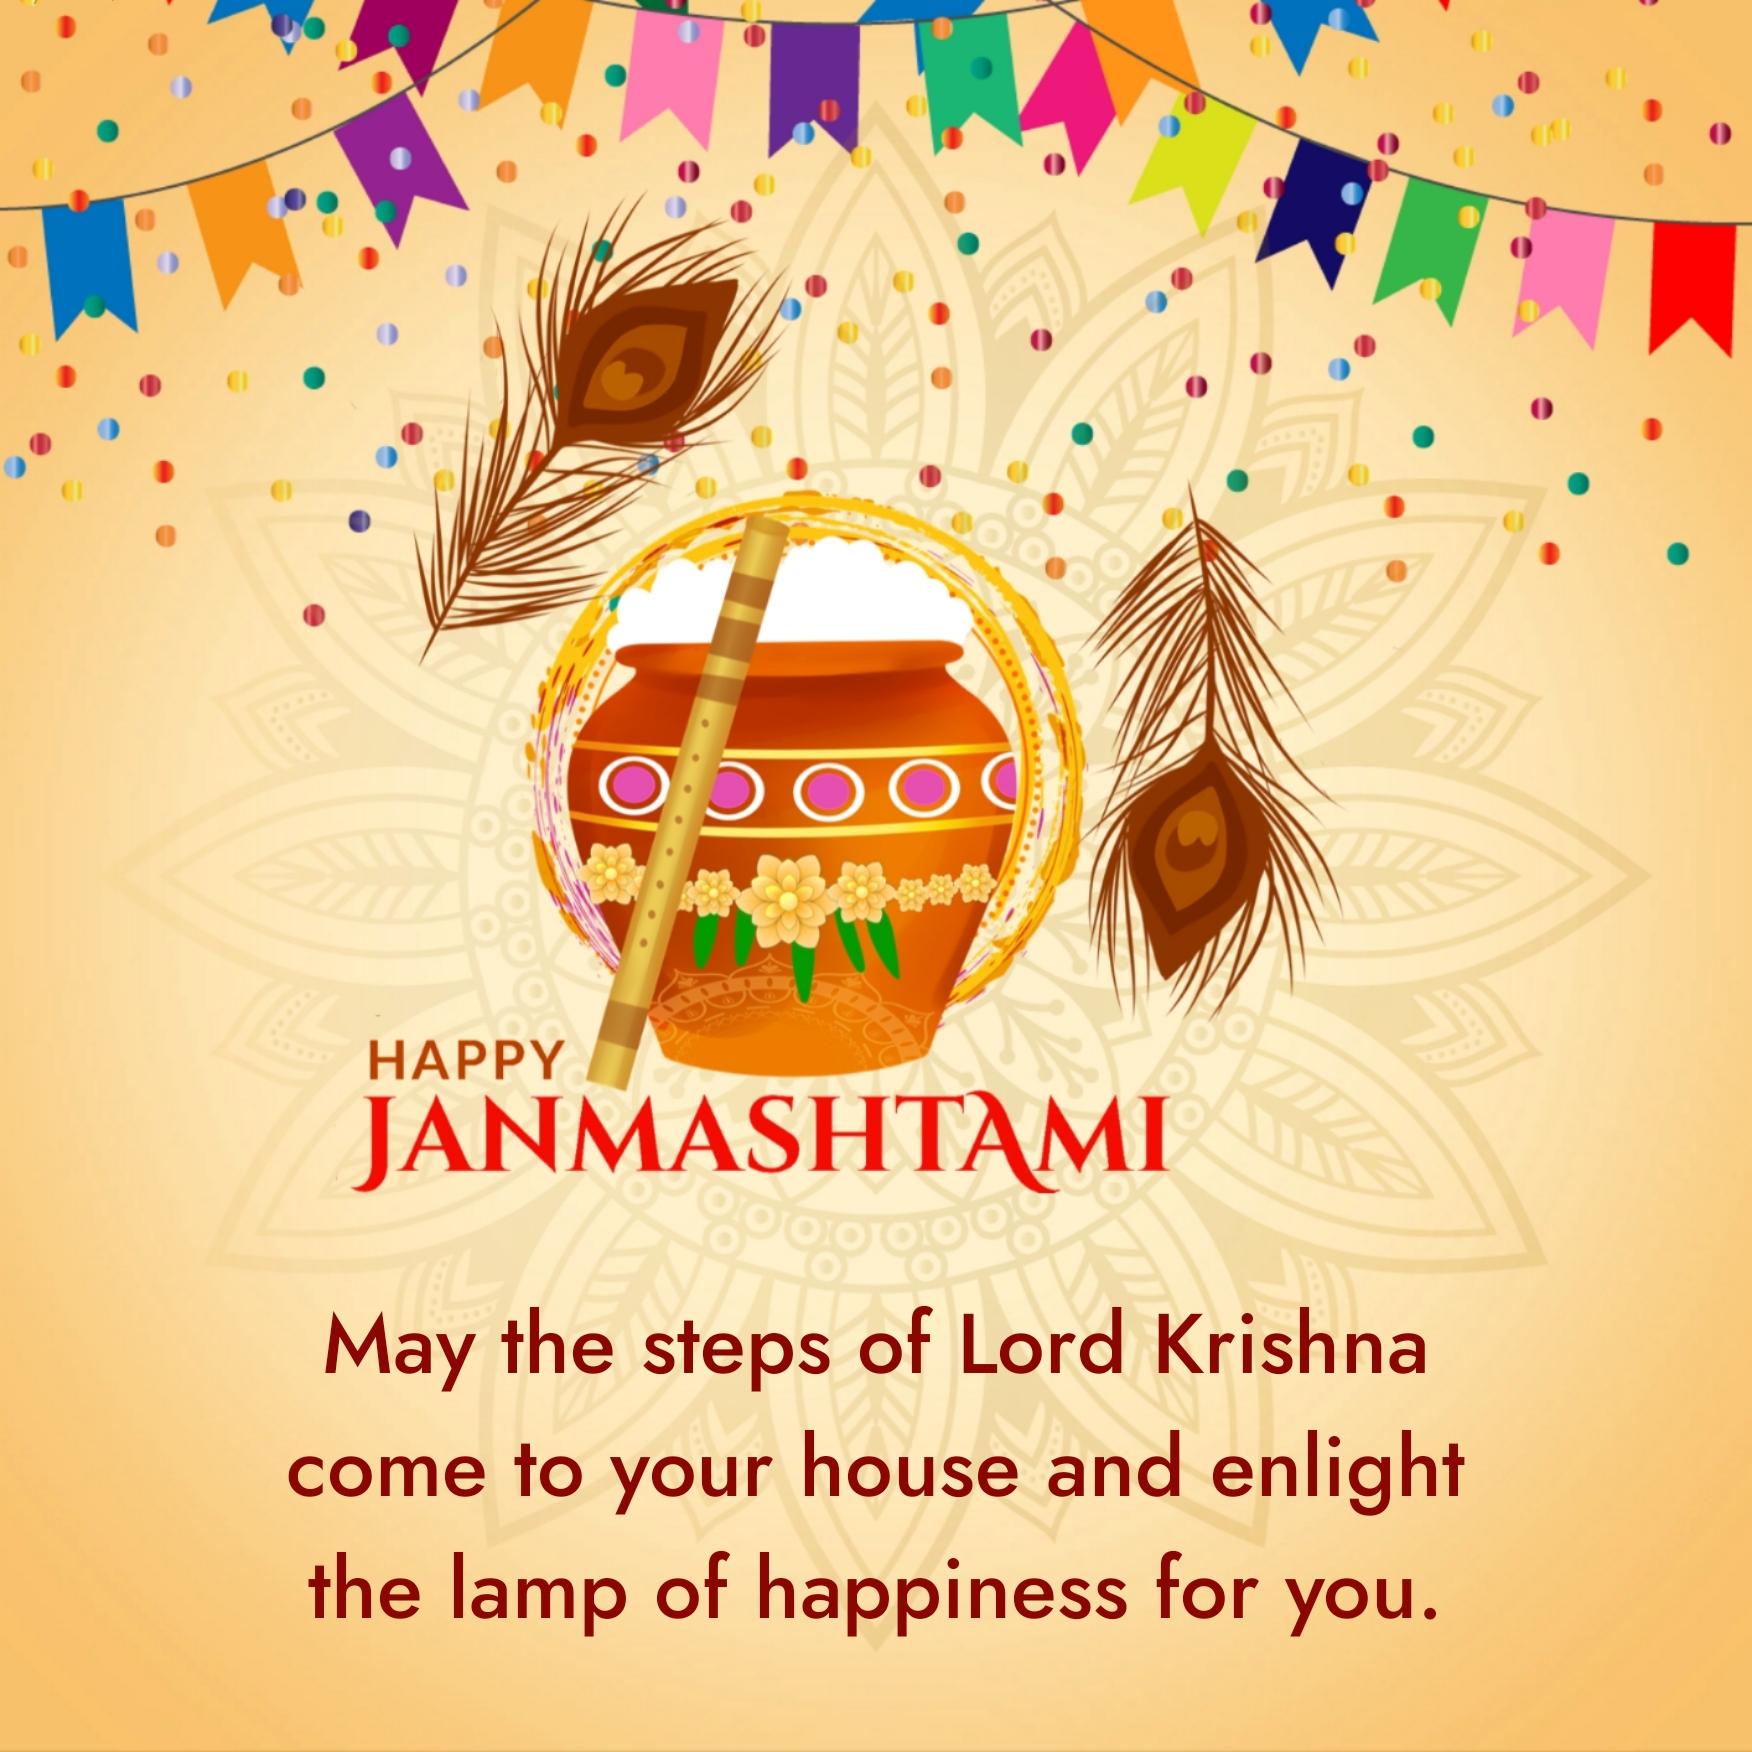 May the steps of Lord Krishna come to your house